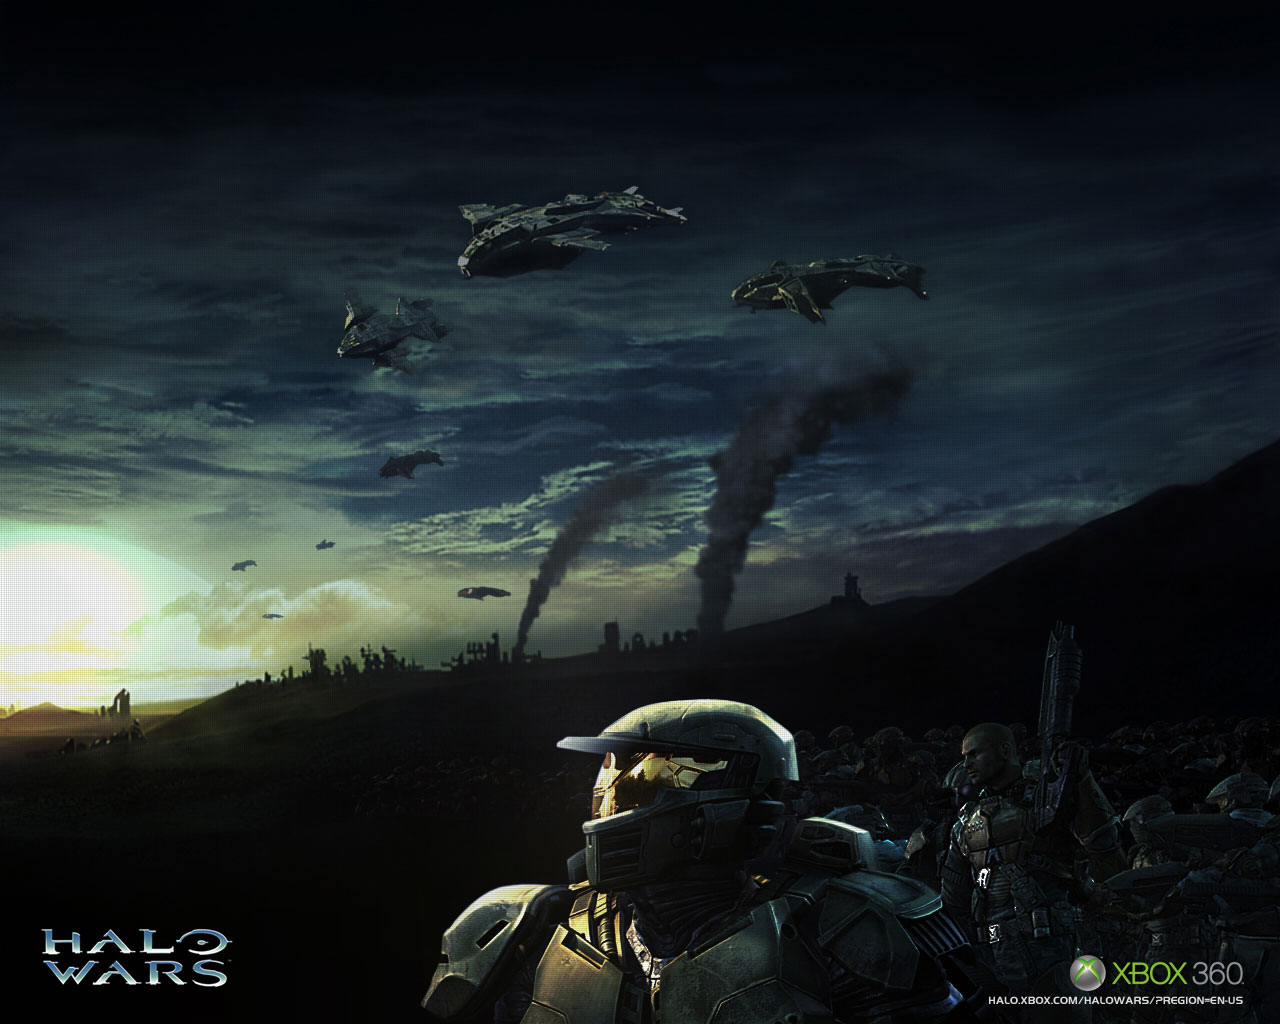 halo wars, video game